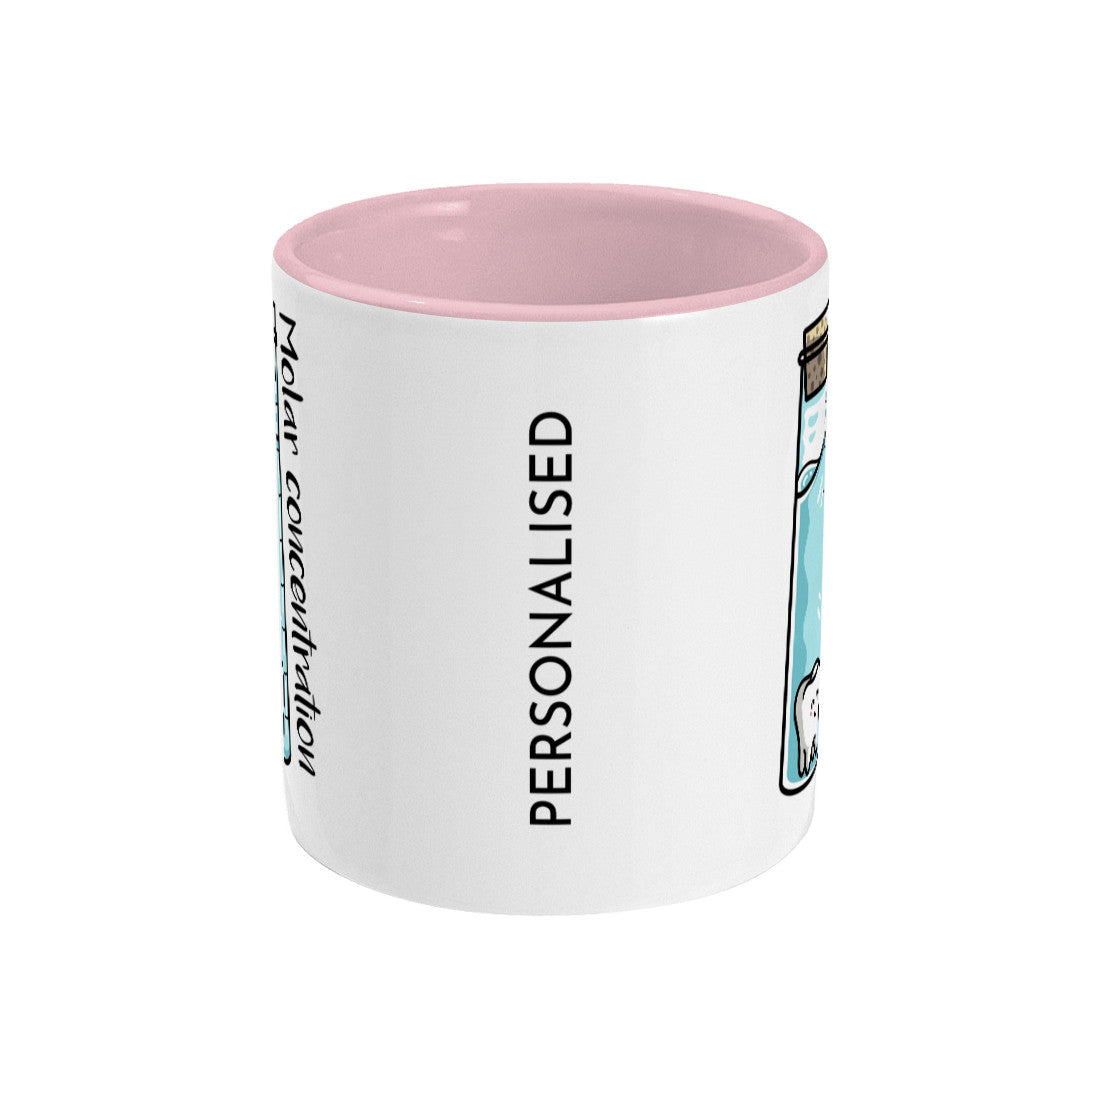 A corked chemistry vessel of liquid containing a molar tooth design on a two toned pink and white ceramic mug, side view with the word personalised printed vertically between the front and back designs.